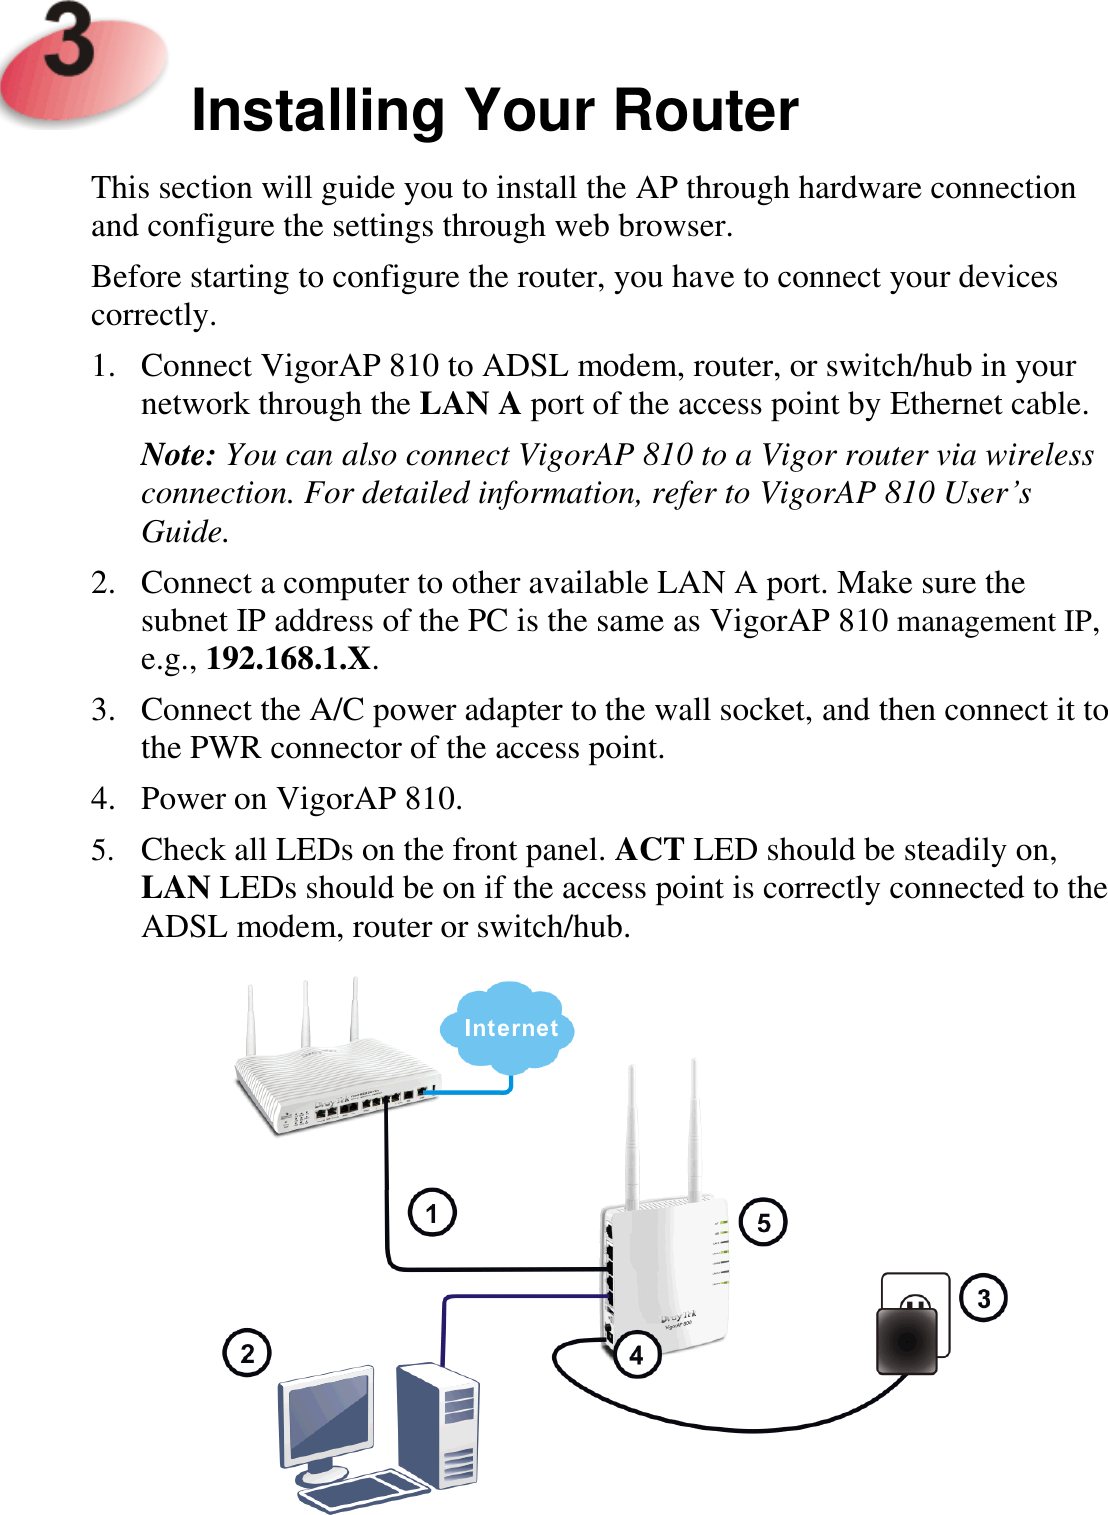     Installing Your Router  This section will guide you to install the AP through hardware connection and configure the settings through web browser.   Before starting to configure the router, you have to connect your devices correctly. 1. Connect VigorAP 810 to ADSL modem, router, or switch/hub in your network through the LAN A port of the access point by Ethernet cable. Note: You can also connect VigorAP 810 to a Vigor router via wireless connection. For detailed information, refer to VigorAP 810 User’s Guide. 2. Connect a computer to other available LAN A port. Make sure the subnet IP address of the PC is the same as VigorAP 810 management IP, e.g., 192.168.1.X. 3. Connect the A/C power adapter to the wall socket, and then connect it to the PWR connector of the access point.   4. Power on VigorAP 810.   5. Check all LEDs on the front panel. ACT LED should be steadily on, LAN LEDs should be on if the access point is correctly connected to the ADSL modem, router or switch/hub.  